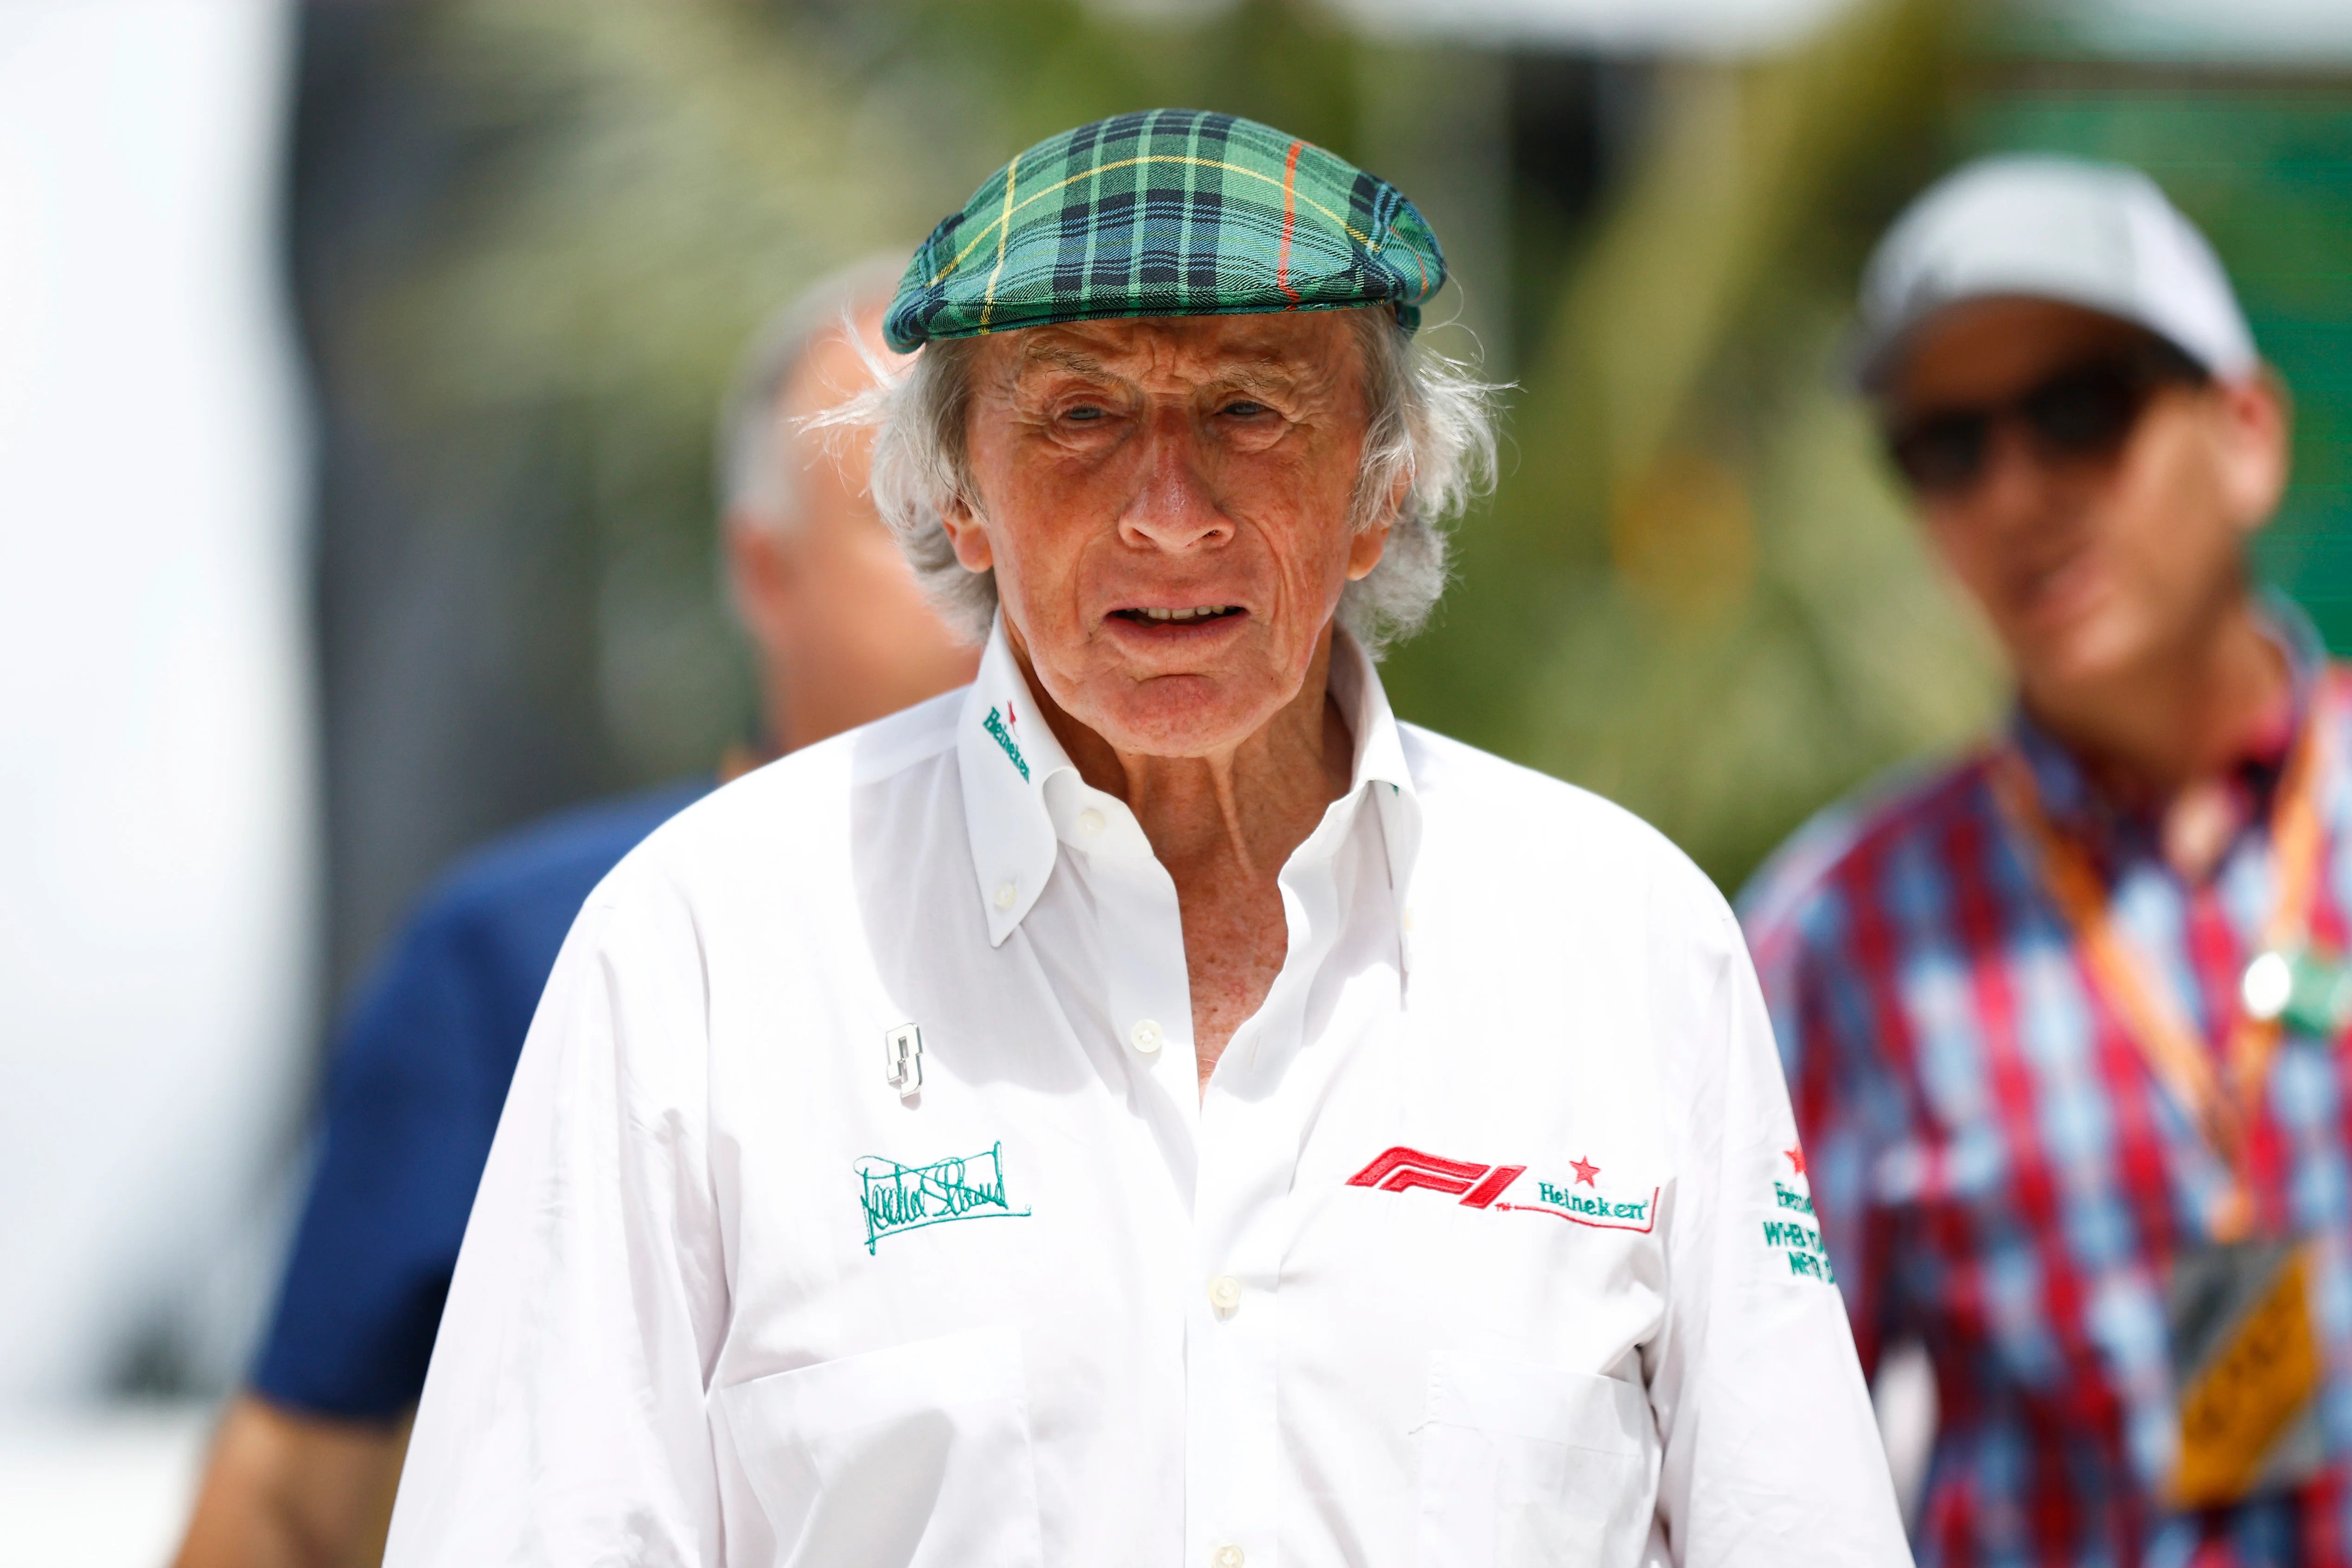 F1 Jackie Stewart on a life with dyslexia and his unrelenting push for